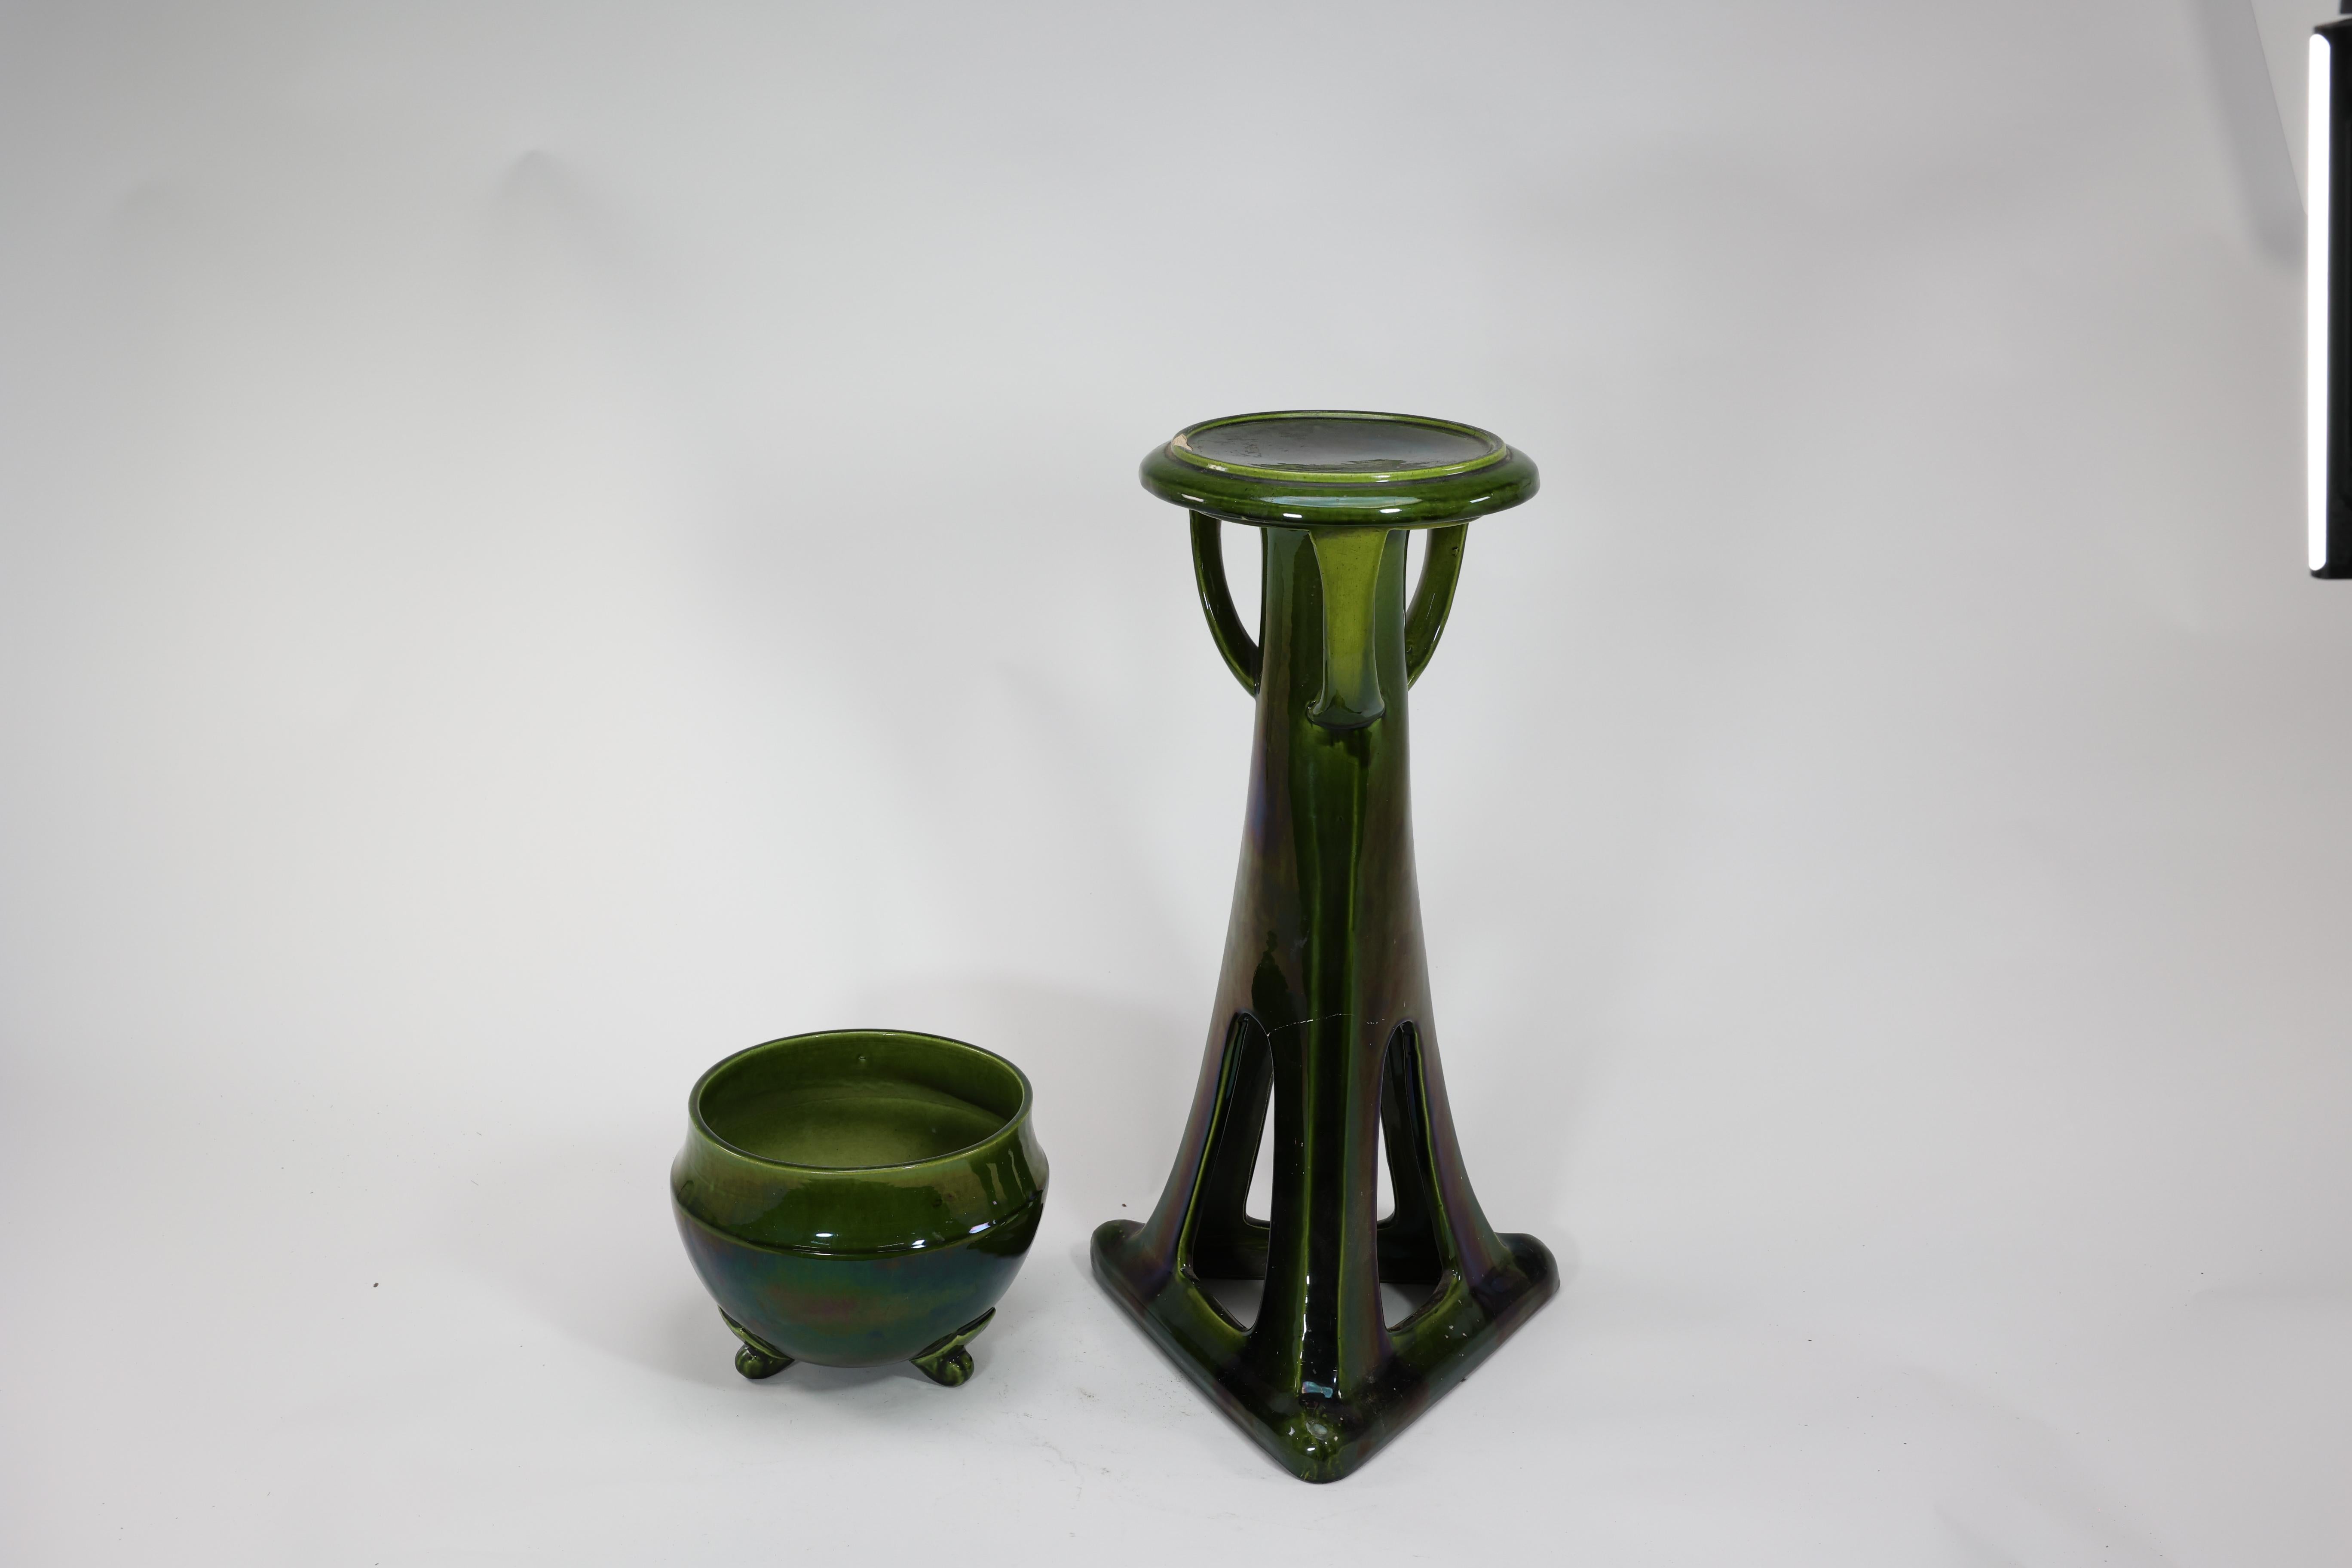 English Bretby. An Arts and Crafts green planter and stand both stamped Bretby. For Sale